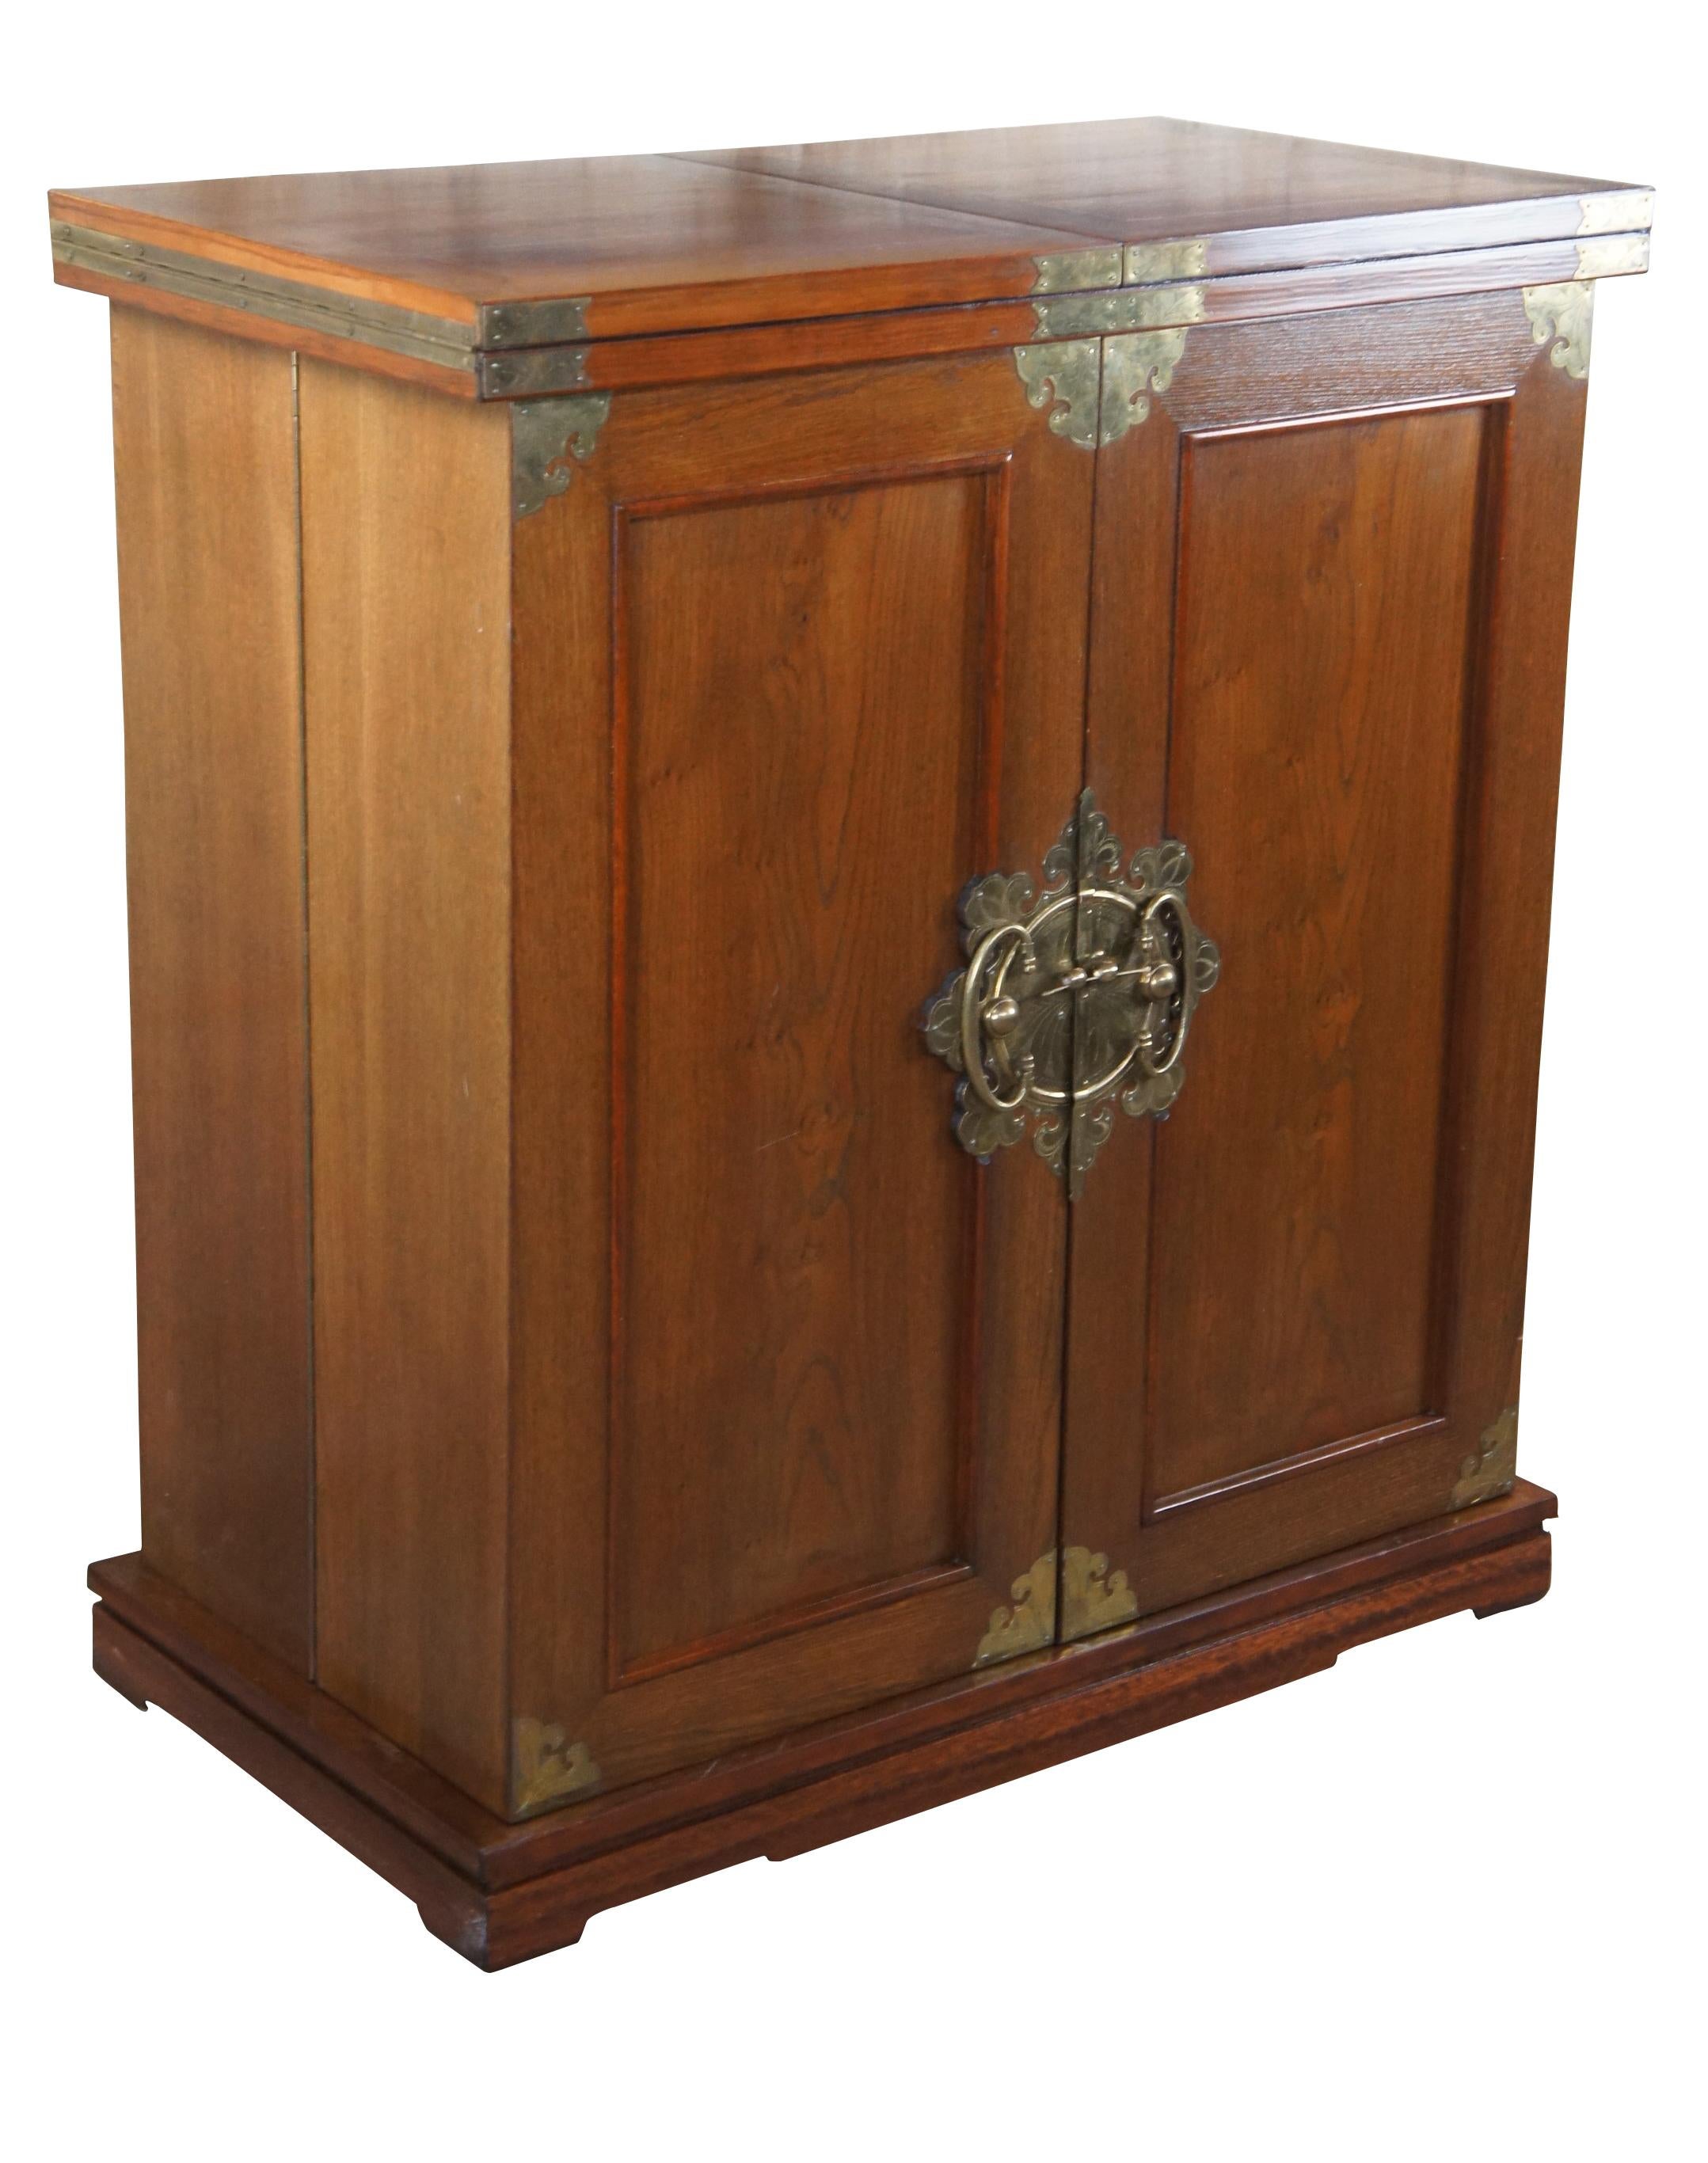 An impressive mid 20th century Asian expandable dry bar or server. Made from elm with beautiful brass mounts. Opens to a large serving surface with inlaid calligraphy and Greek key. Lower cabinet features storage for wine or liquor, hanging